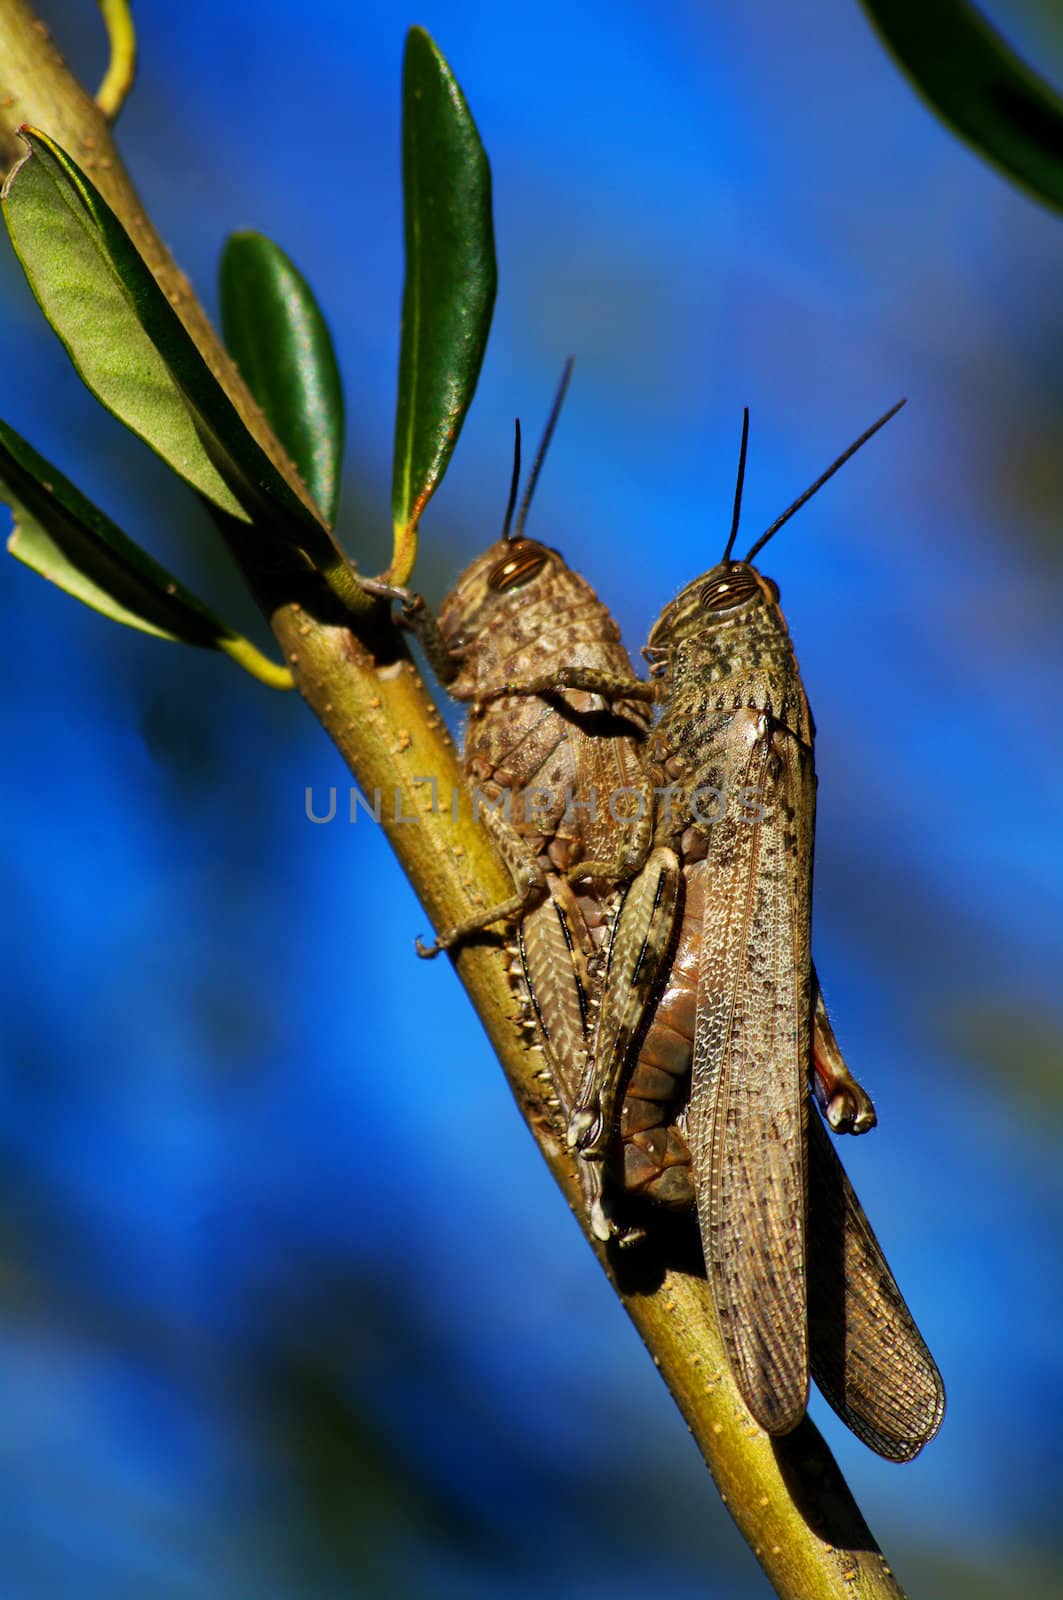 Grasshoppers mating - autumn mating